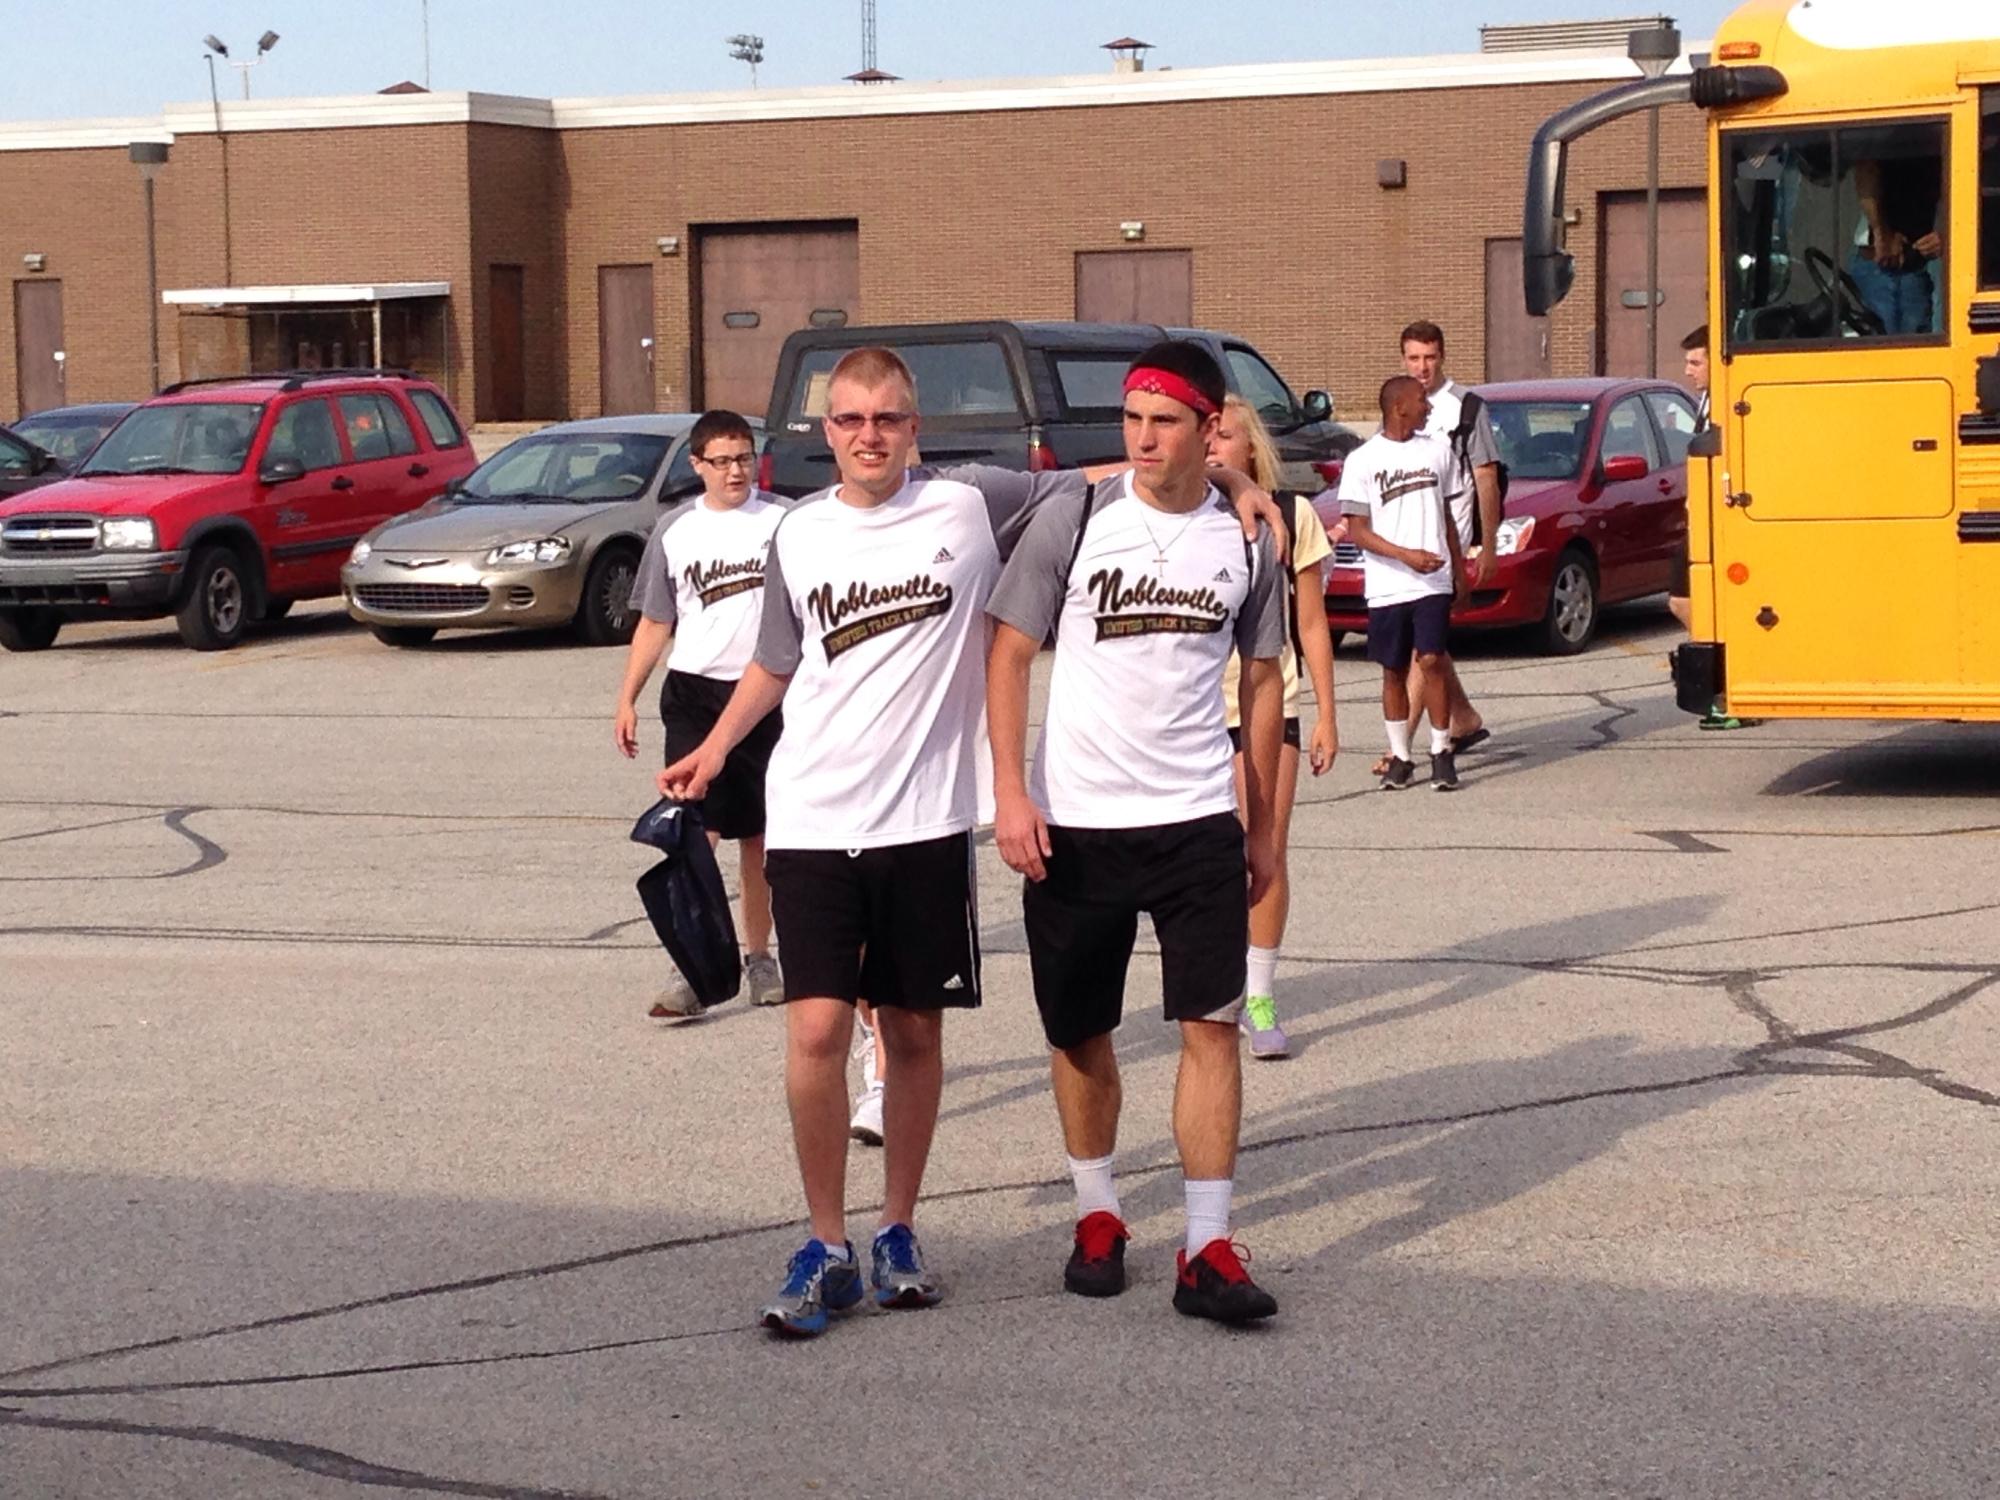 Mitch Bonar (left) was a member of Noblesville High School's Unified Track & Field team.